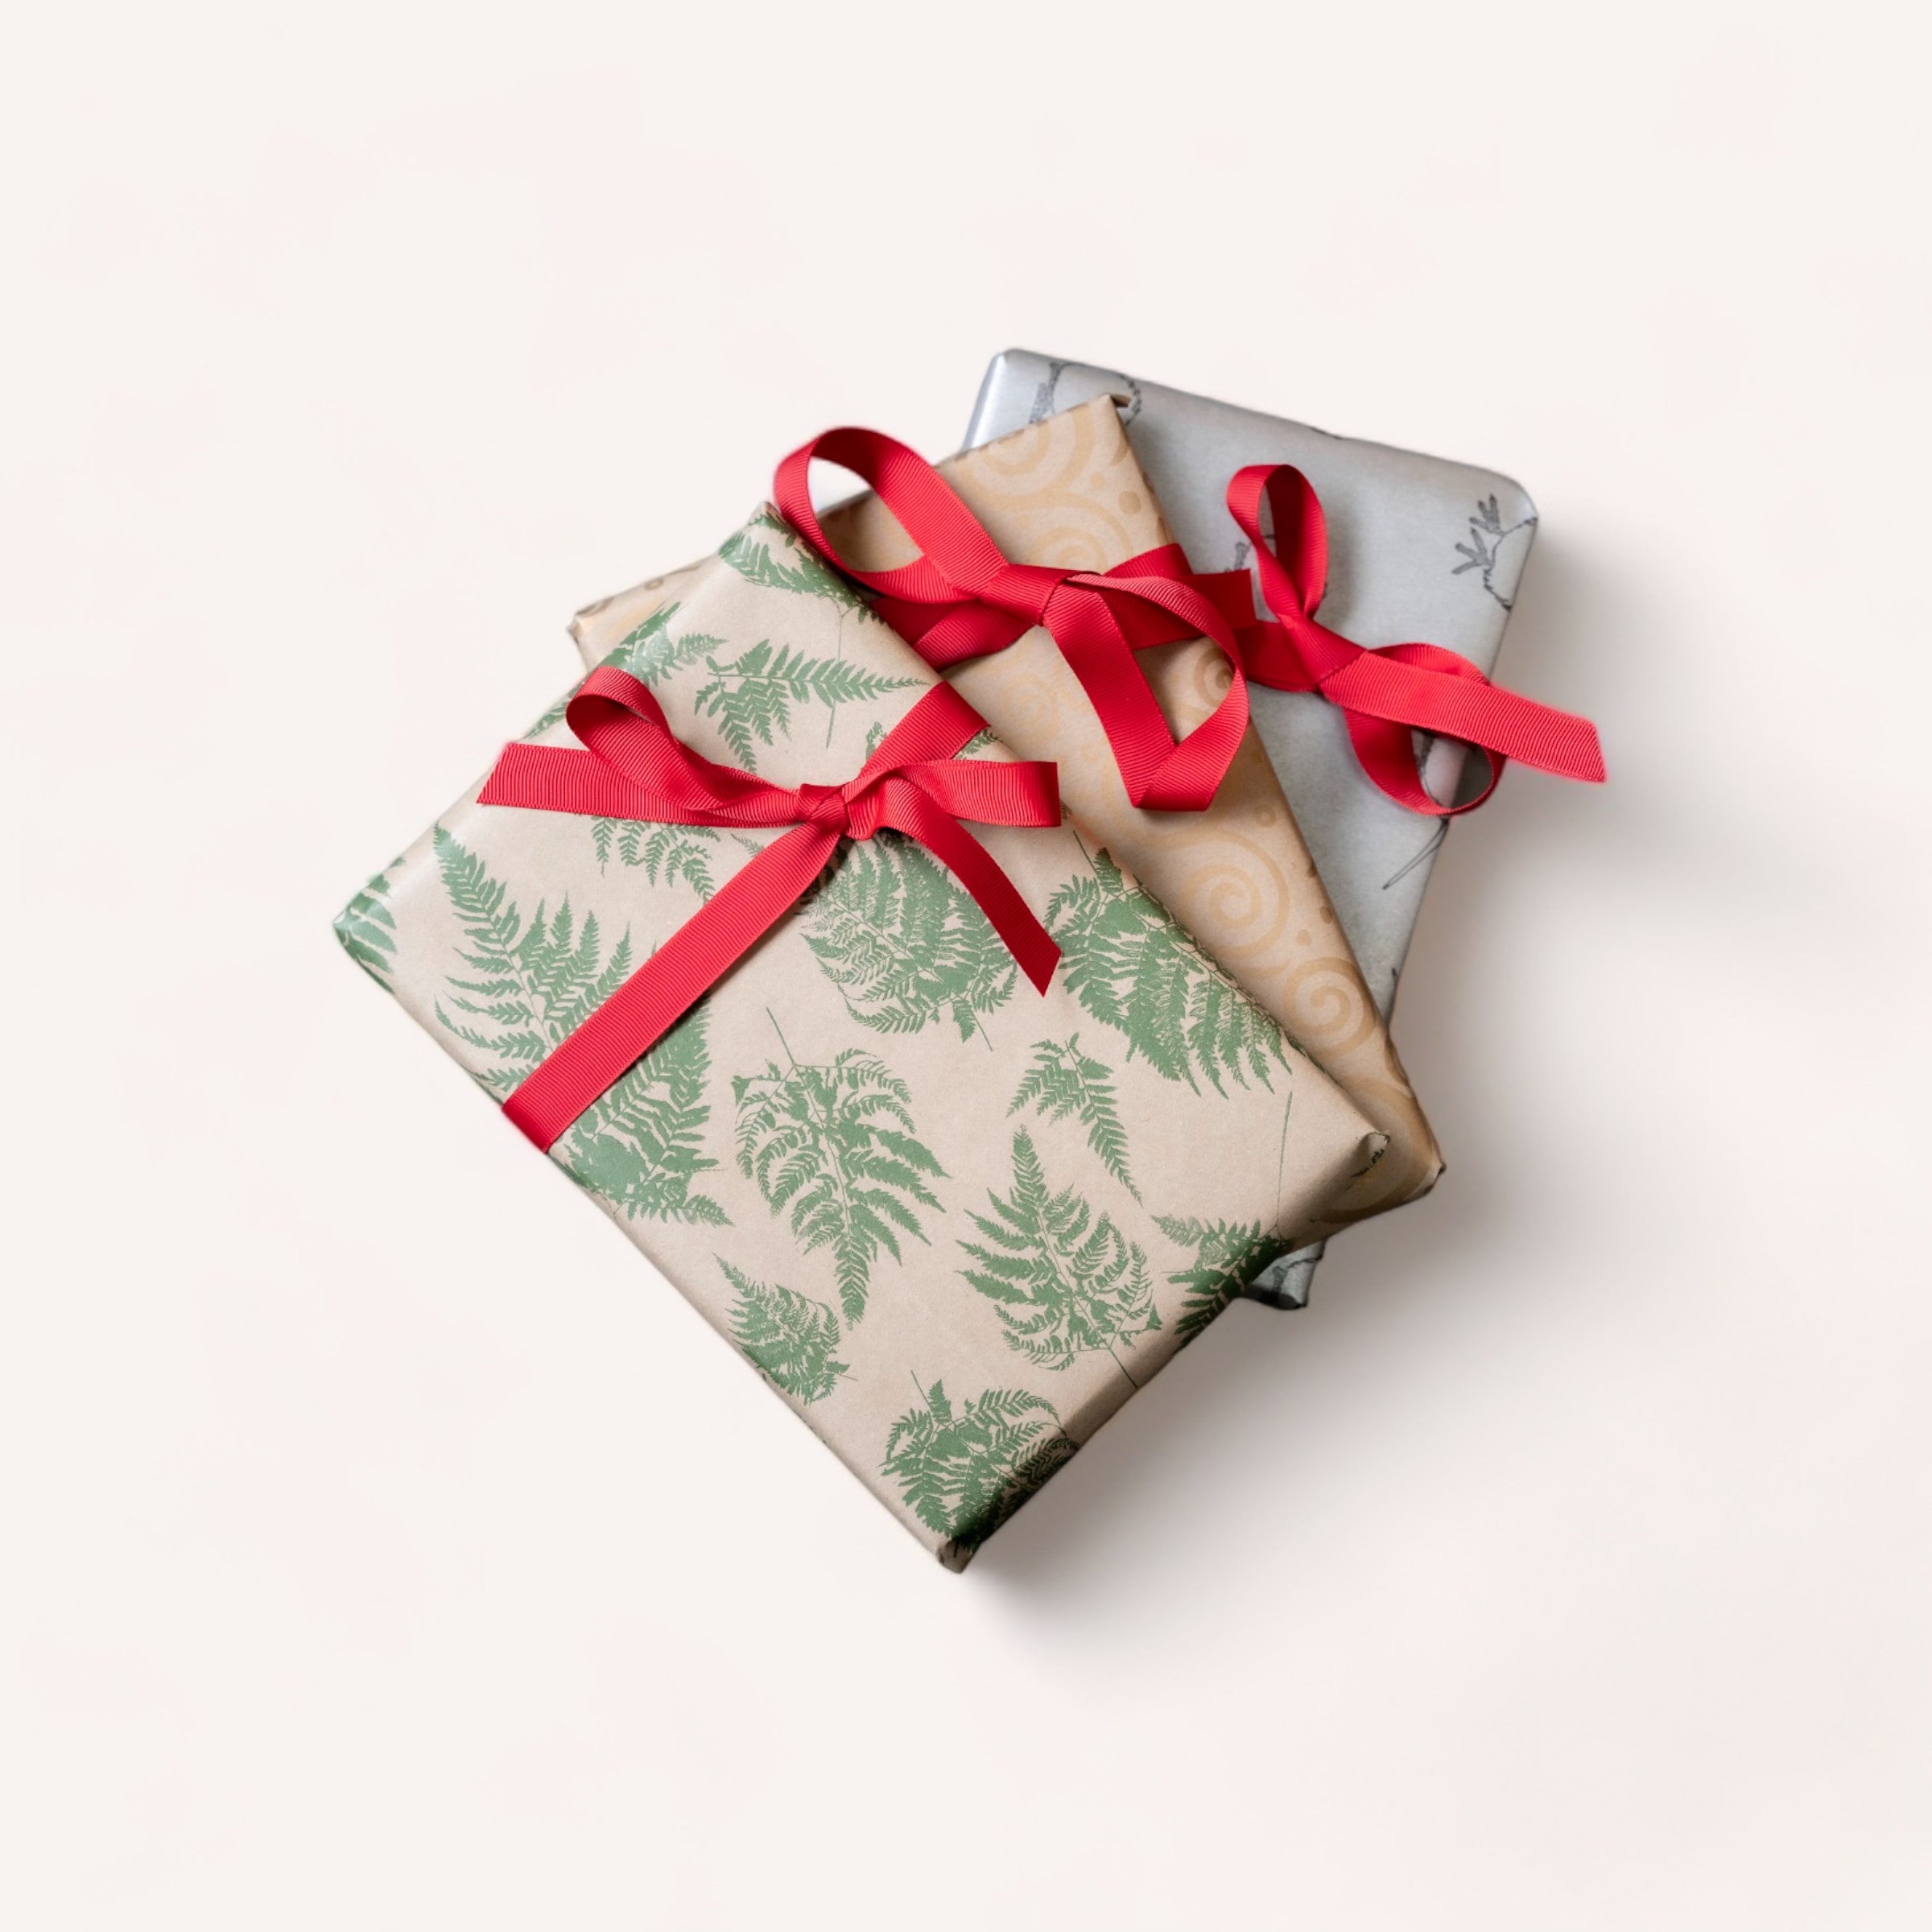 Two neatly wrapped gift boxes with red ribbons, one with fern patterns and the other with an elegant design on premium 65gsm paper, set against a clean white background.